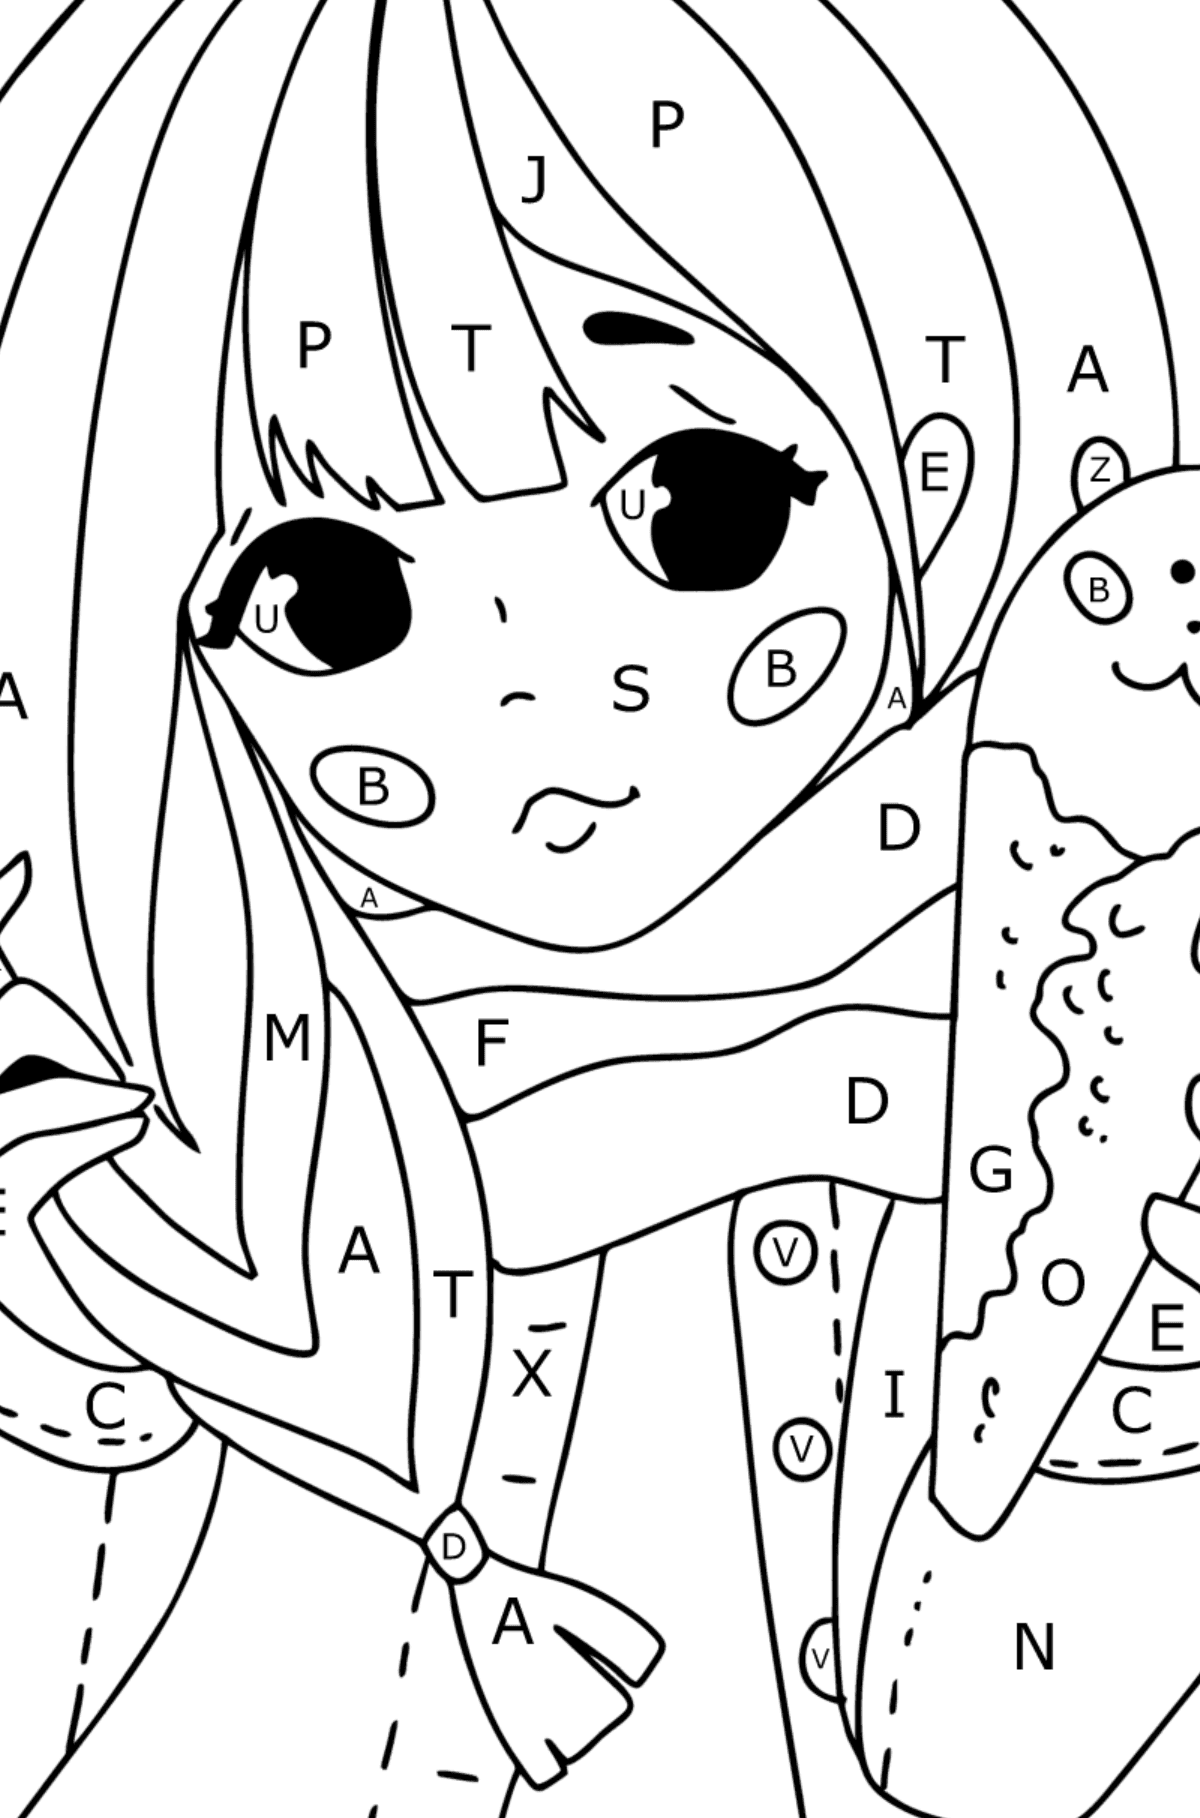 Pretty anime girl coloring page - Coloring by Letters for Kids